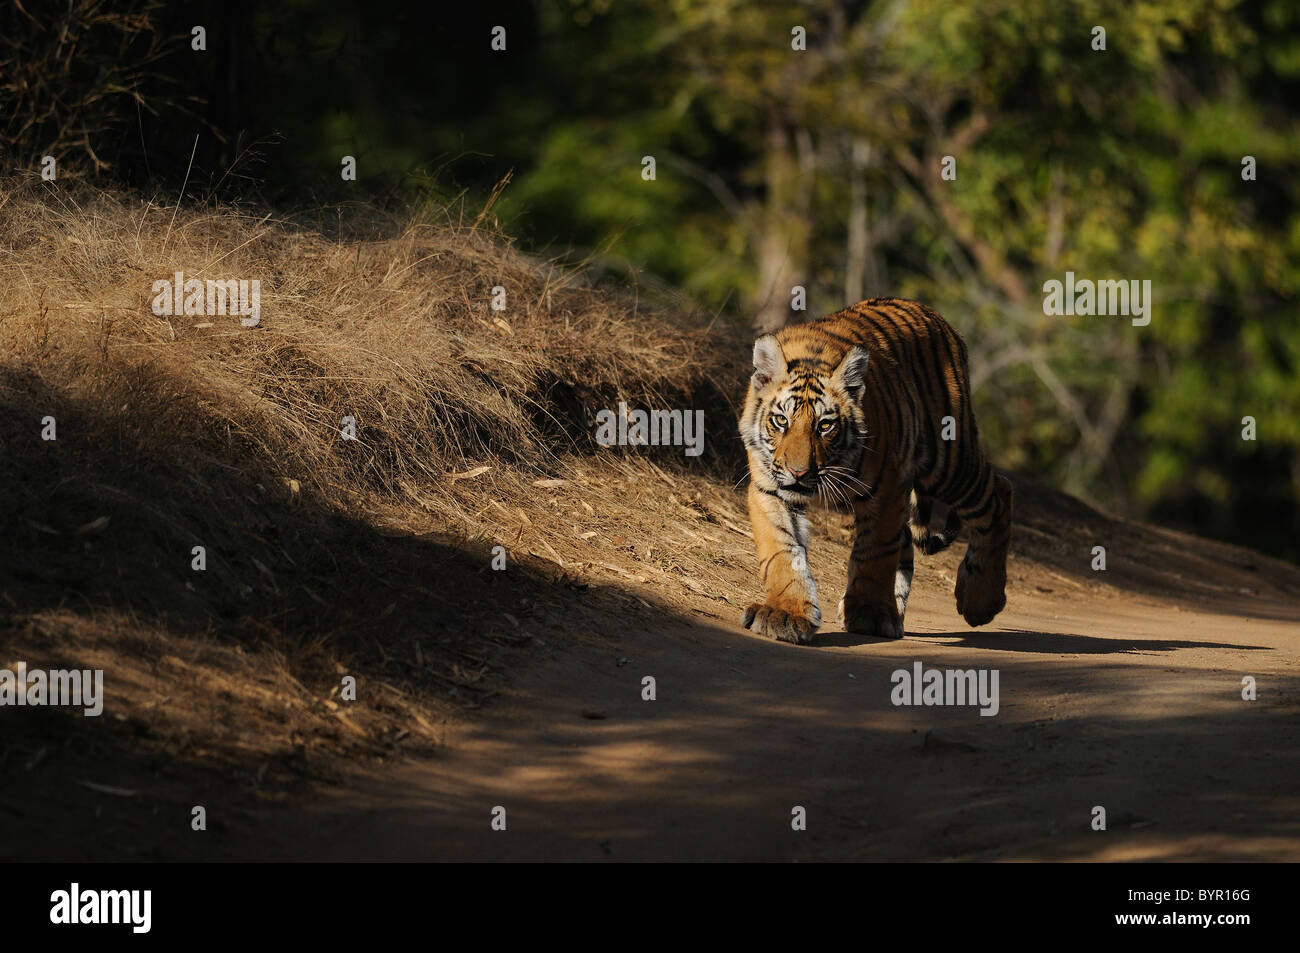 7-month-old female Bengal Tiger cub walking on forest path in Bandhavgarh Tiger Reserve, India Stock Photo